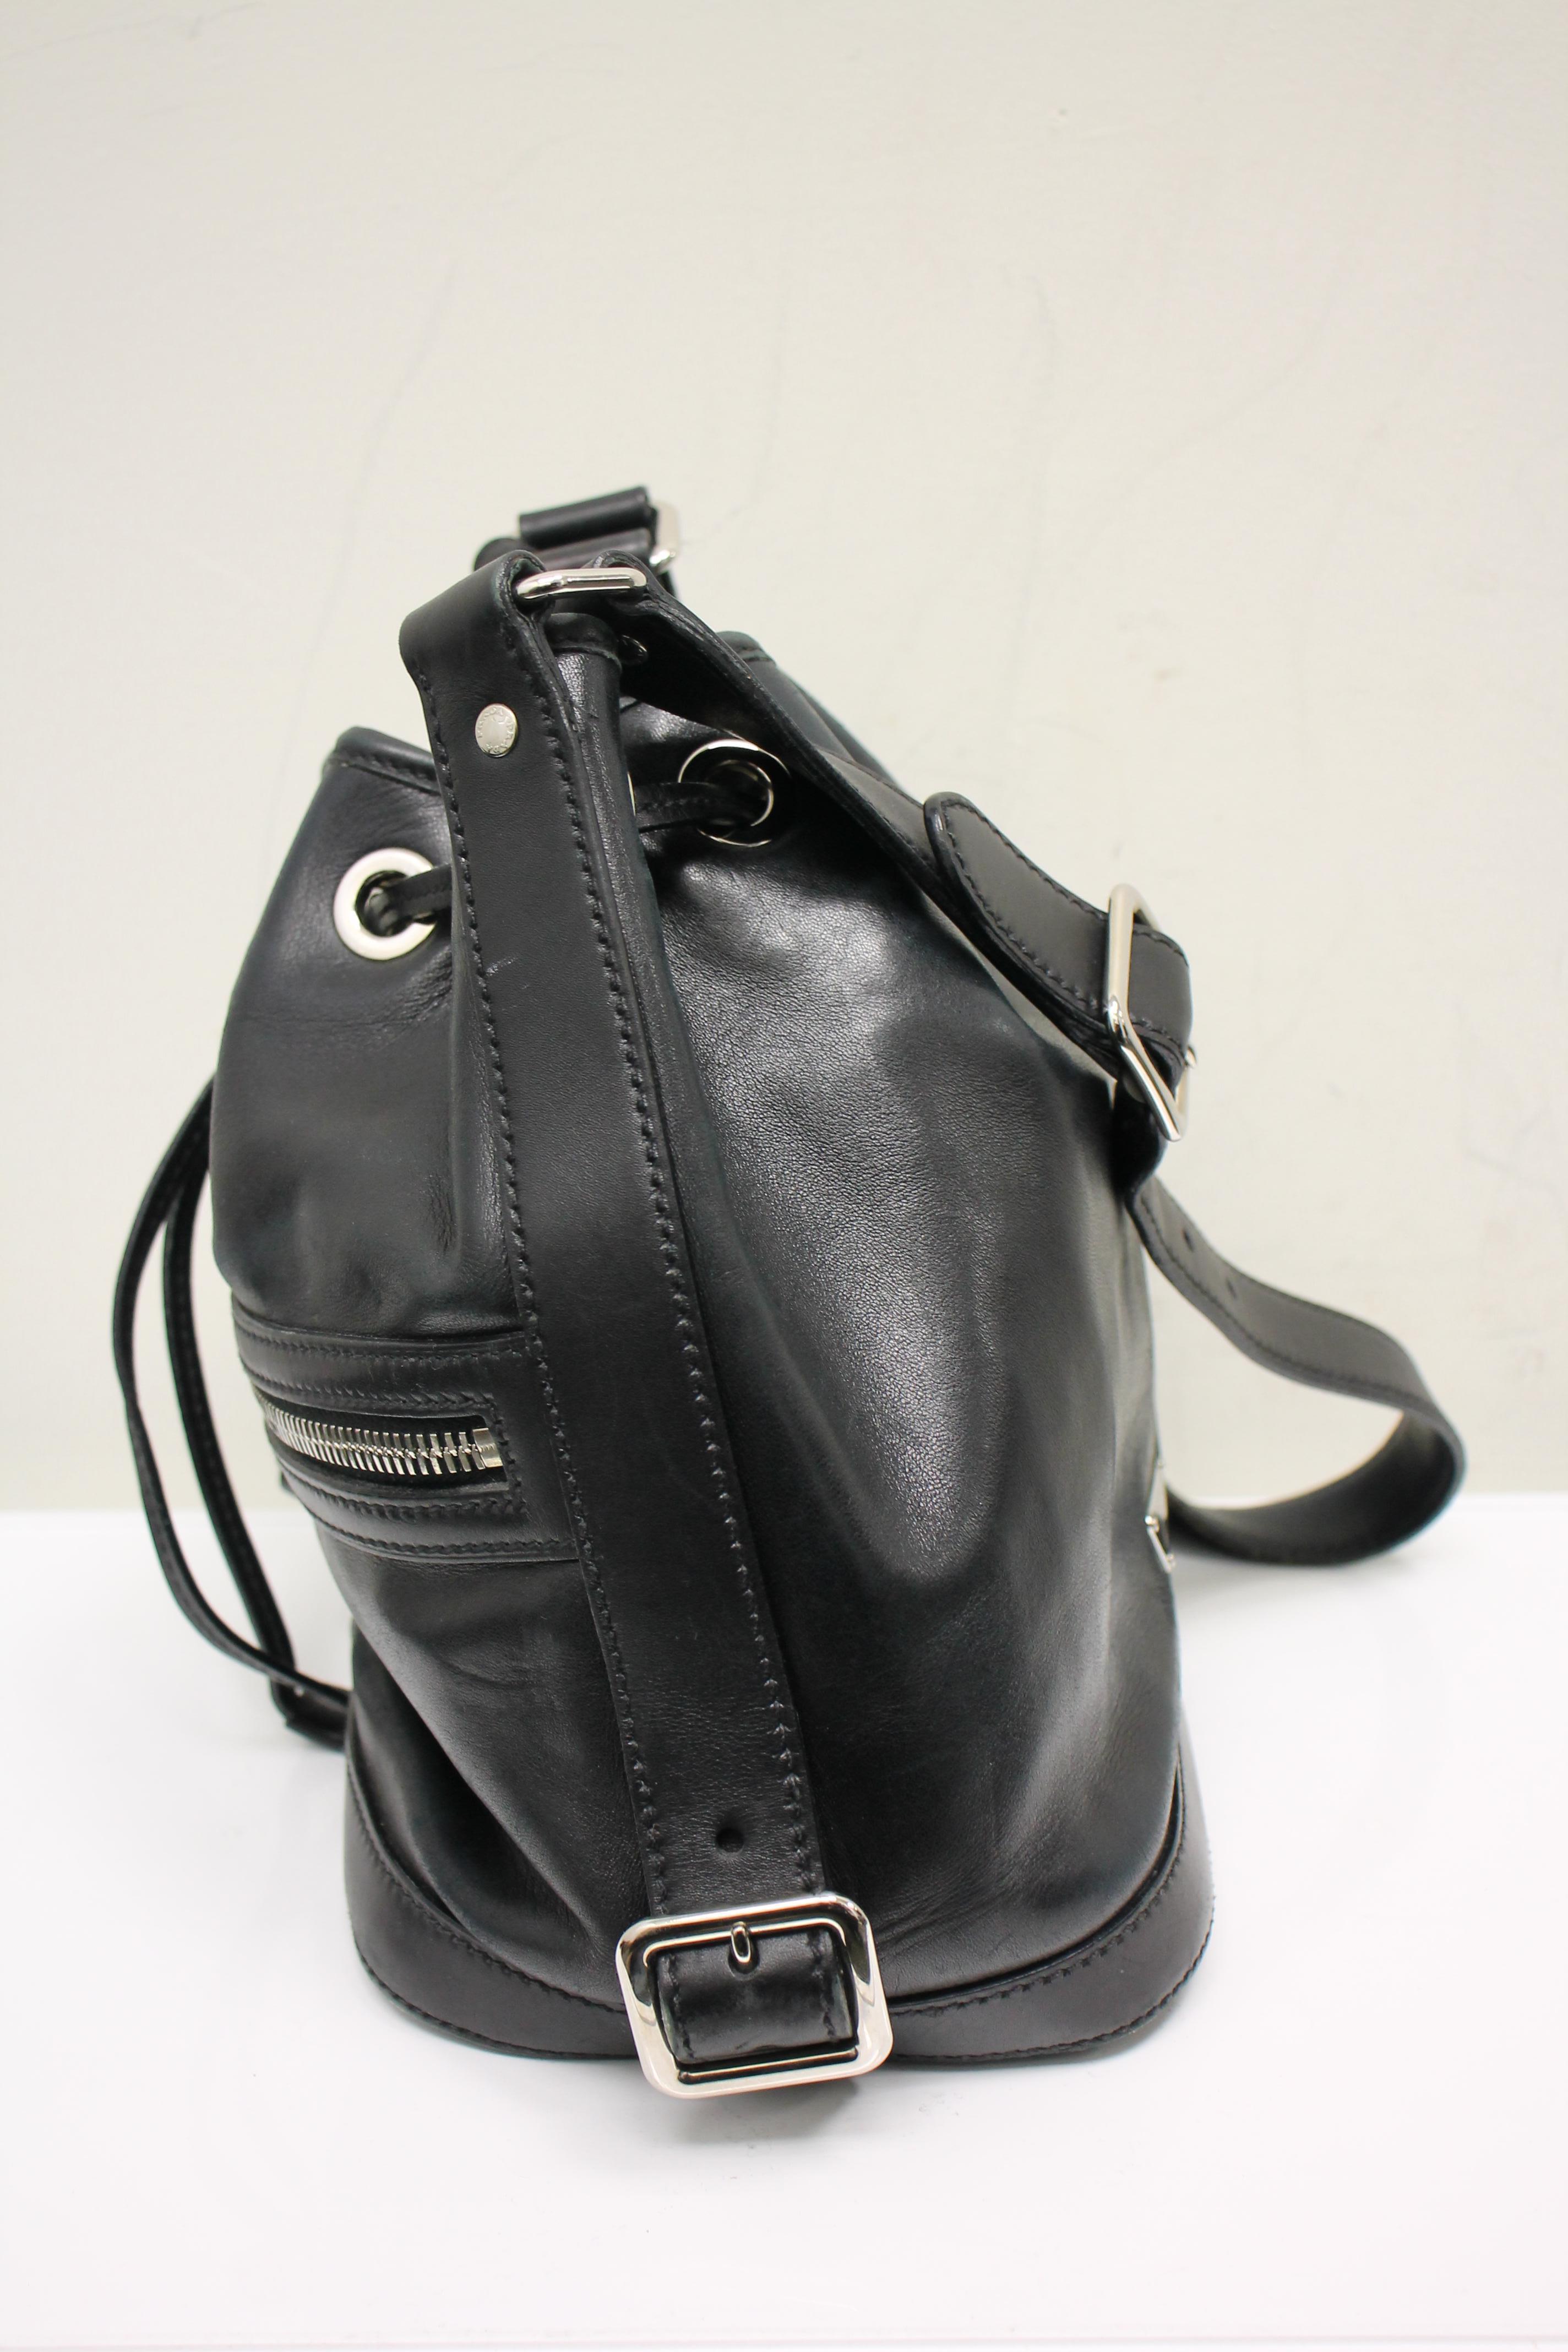 Black leather. Silver-tone hardware. Pull closure at top. Adjustable flat shoulder strap. Logo at back. Buckle detail at sides. One exterior zippered pocket at front. Lined interior. One interior zippered pocket.